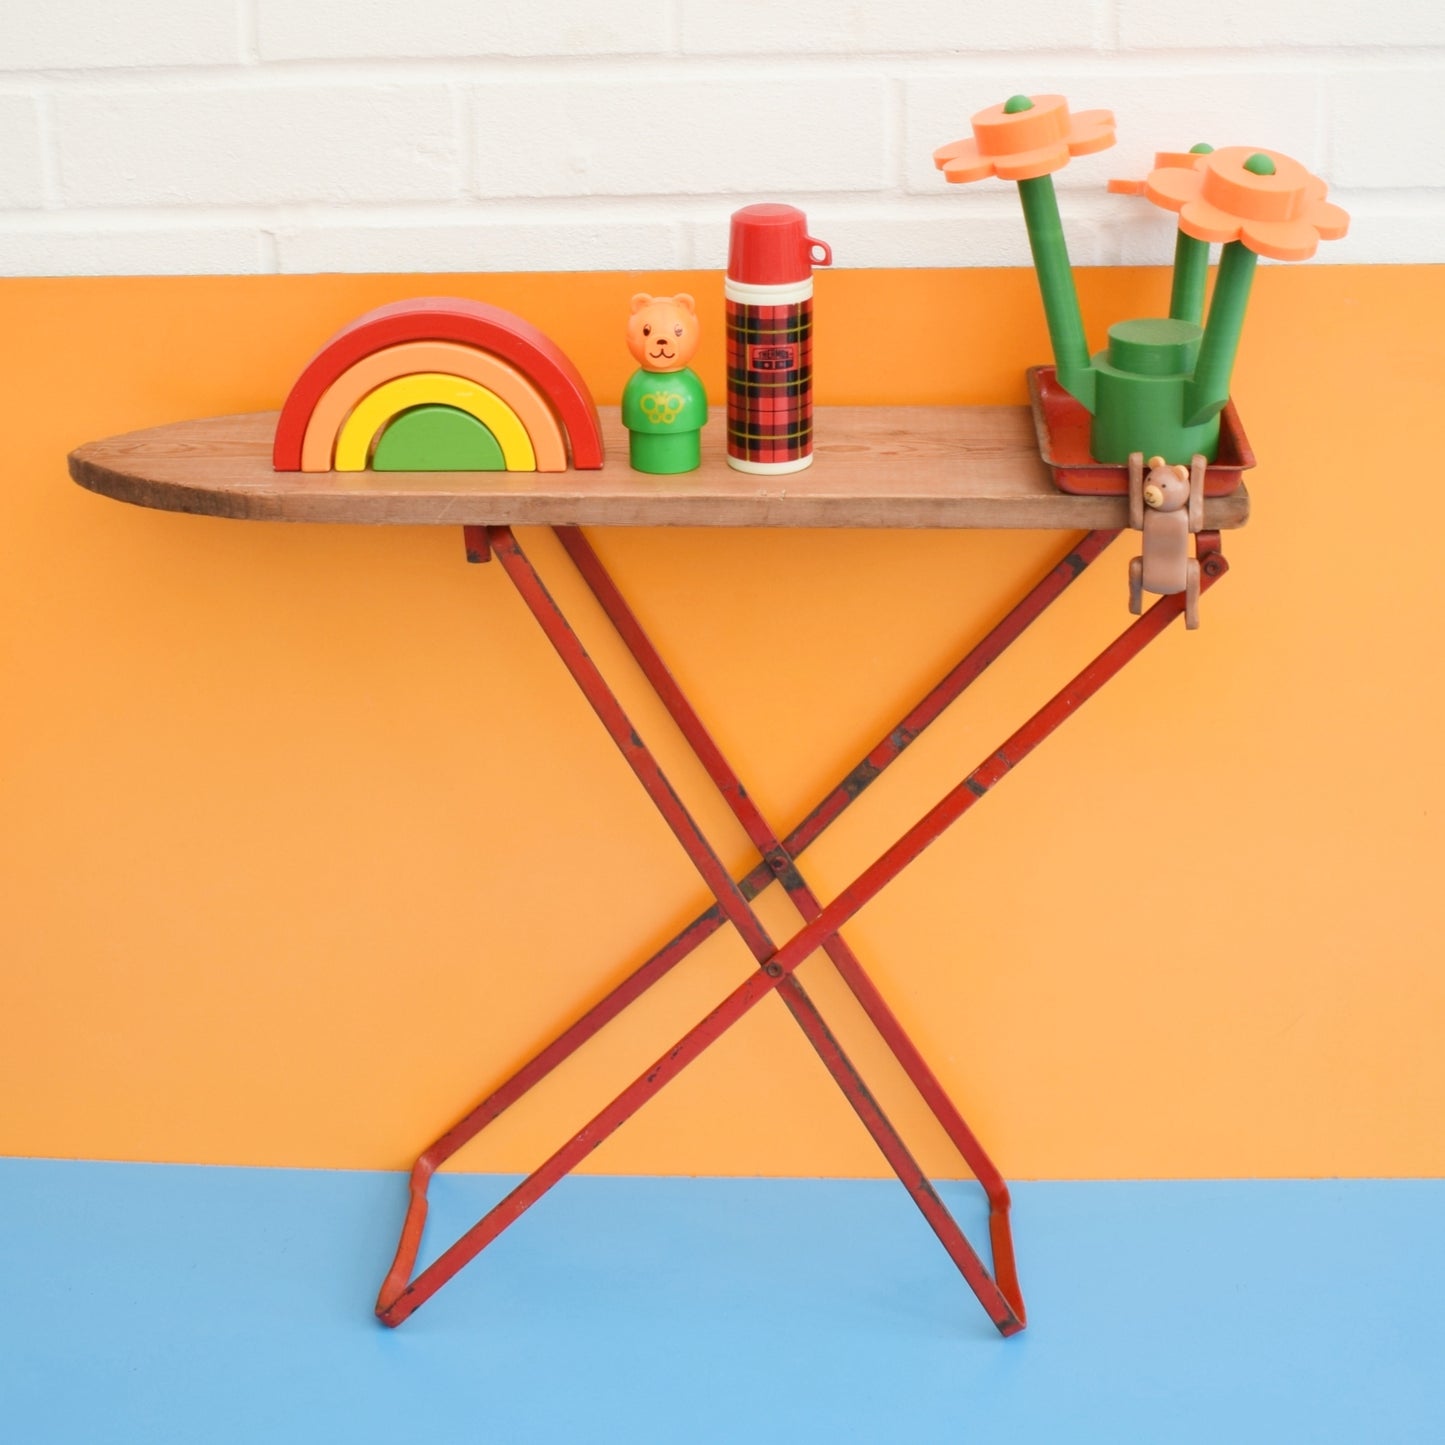 Vintage 1960s Childs Ironing Board - Quirky Shelf